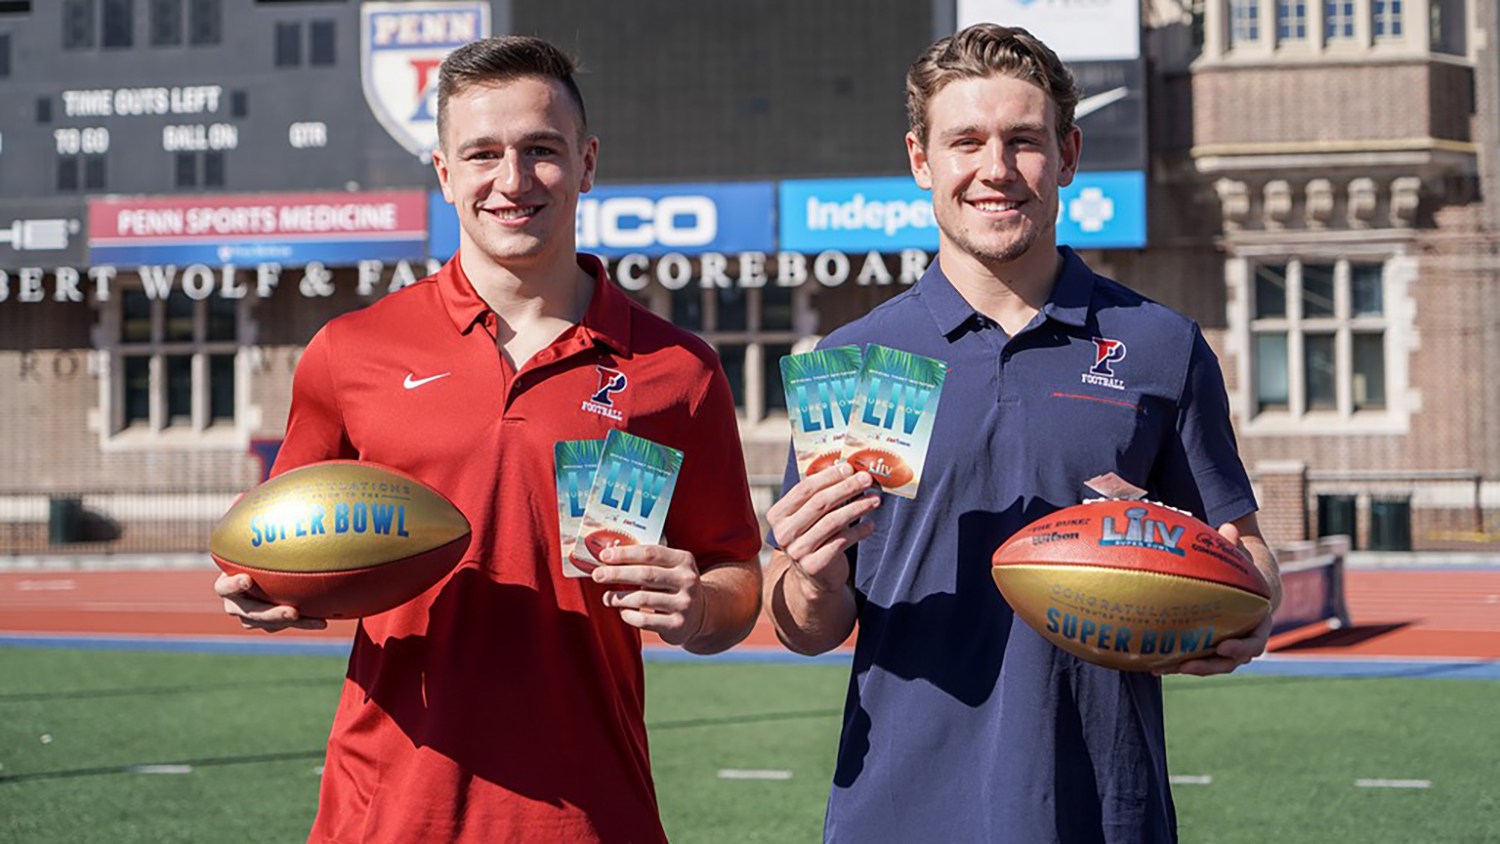 Anthony Lotti and Sam Philippi hold tickets to the Super Bowl in one hand and footballs in the other on a football field.